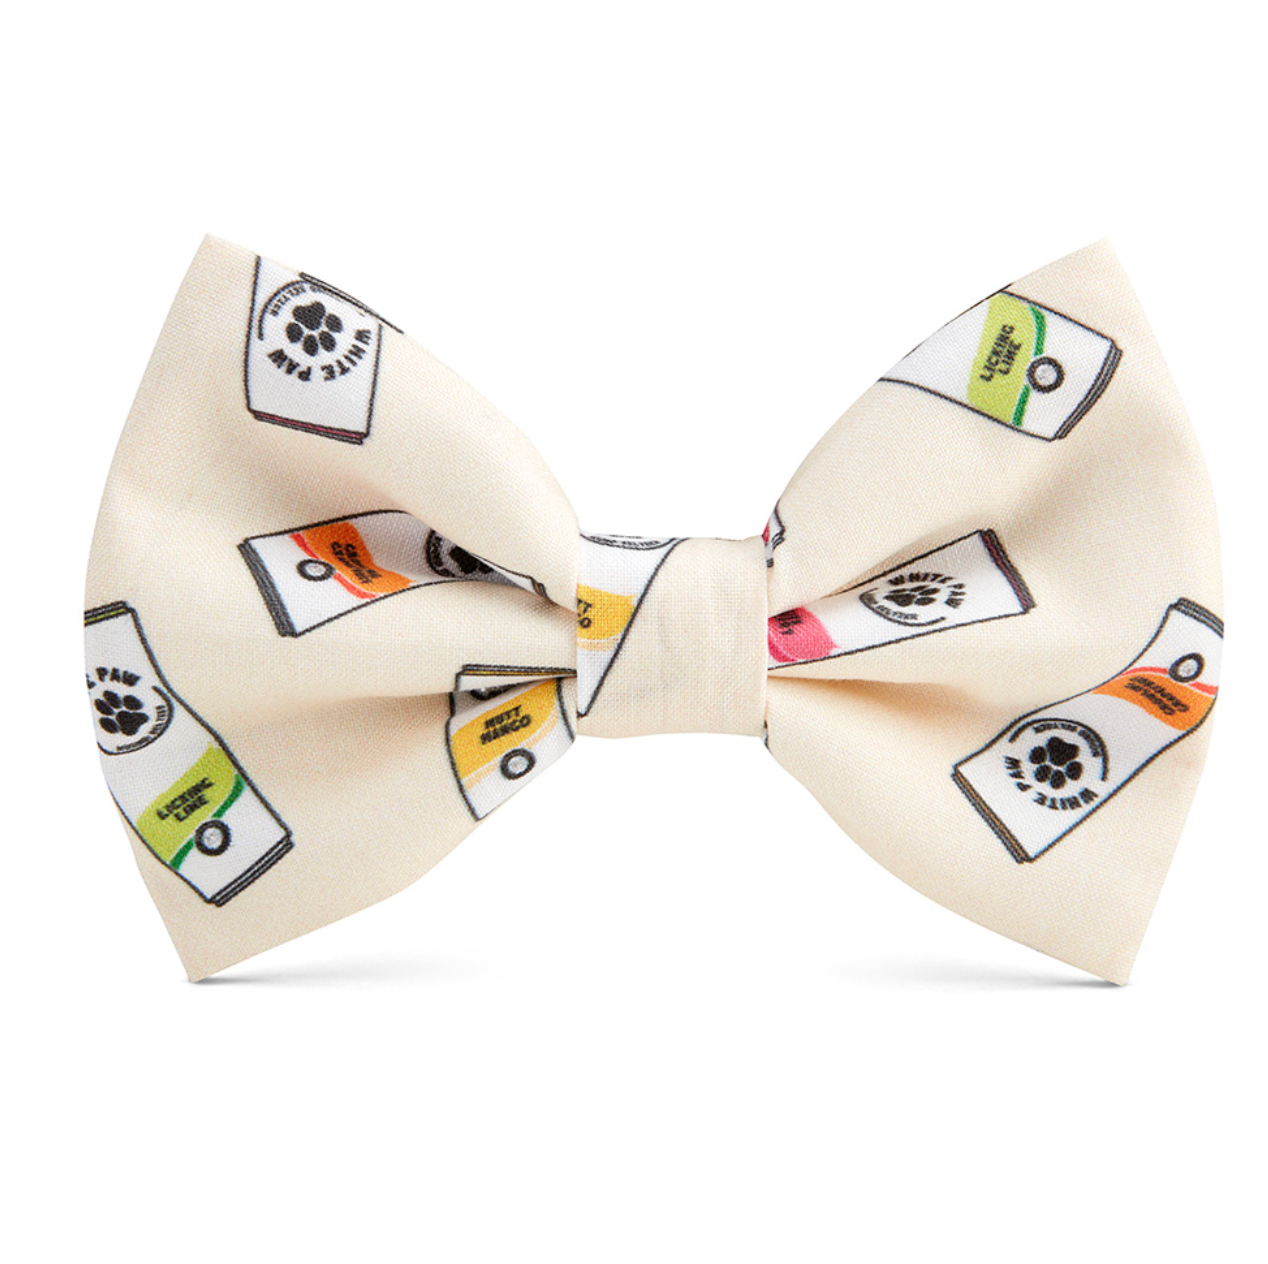 Southern Dog Cotton Doggie Bow Ties